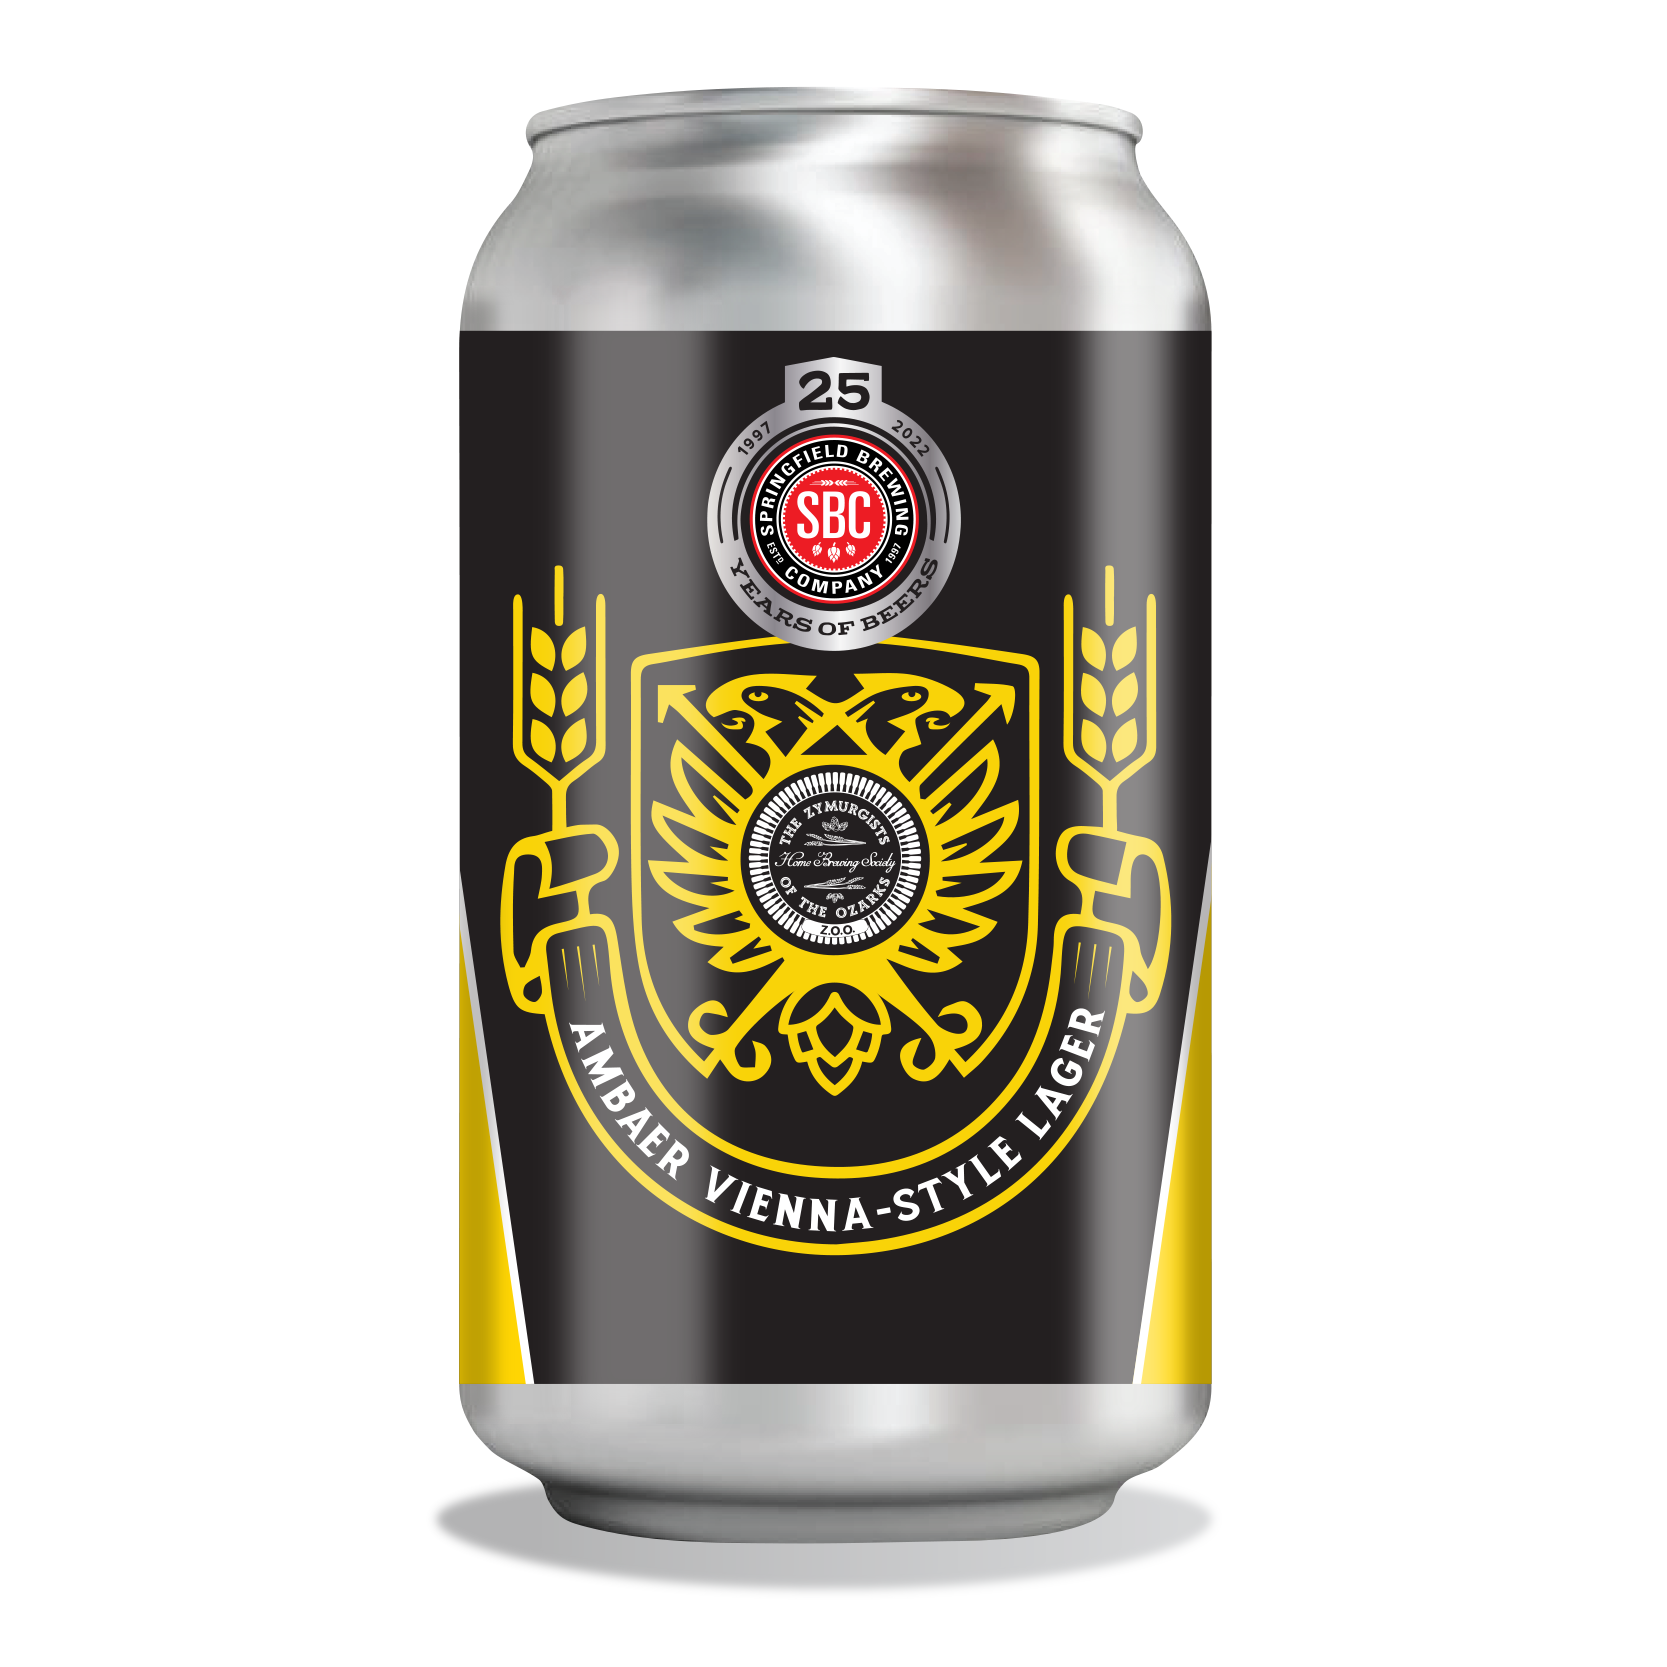 https://brewery.springfieldbrewingco.com/wp-content/uploads/2022/04/AmBaerLager_CanWebsite.png